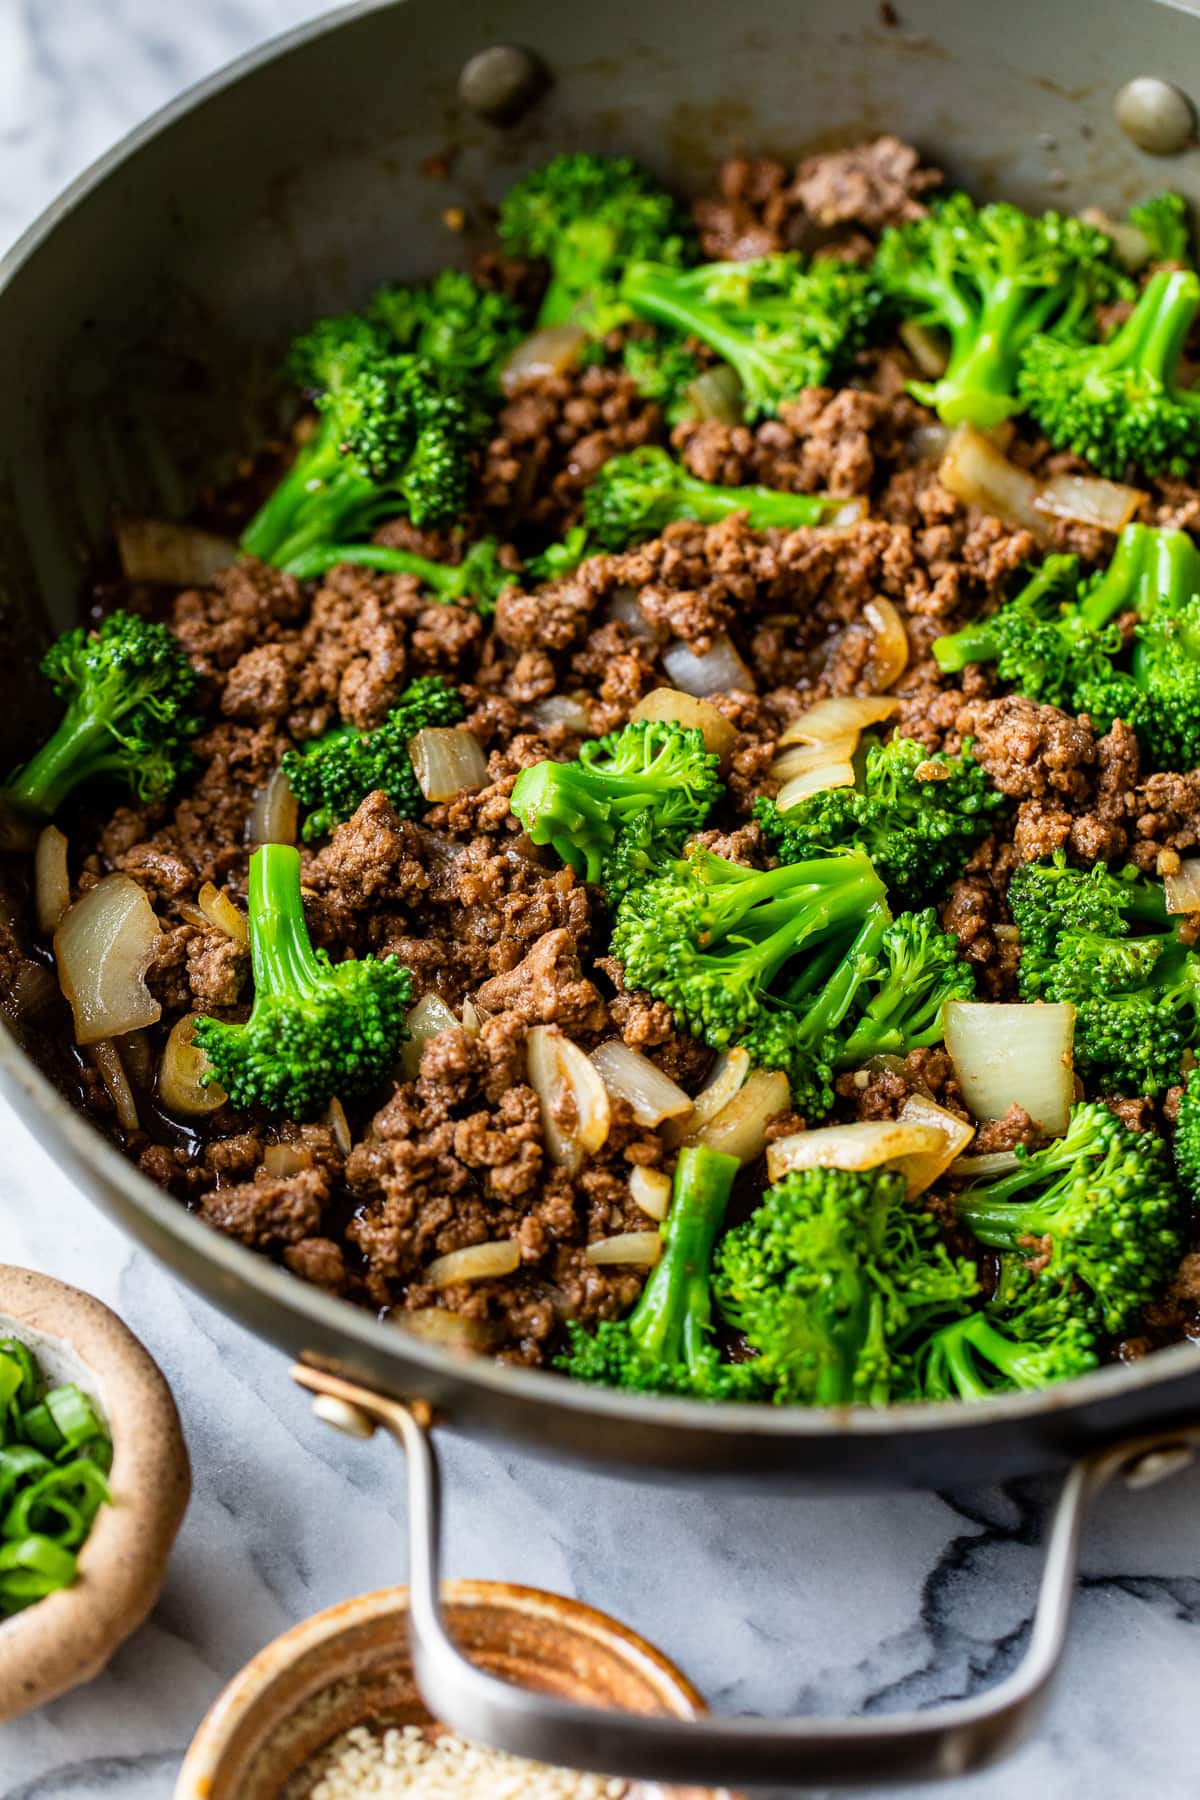 Minced meat and broccoli stir-fry